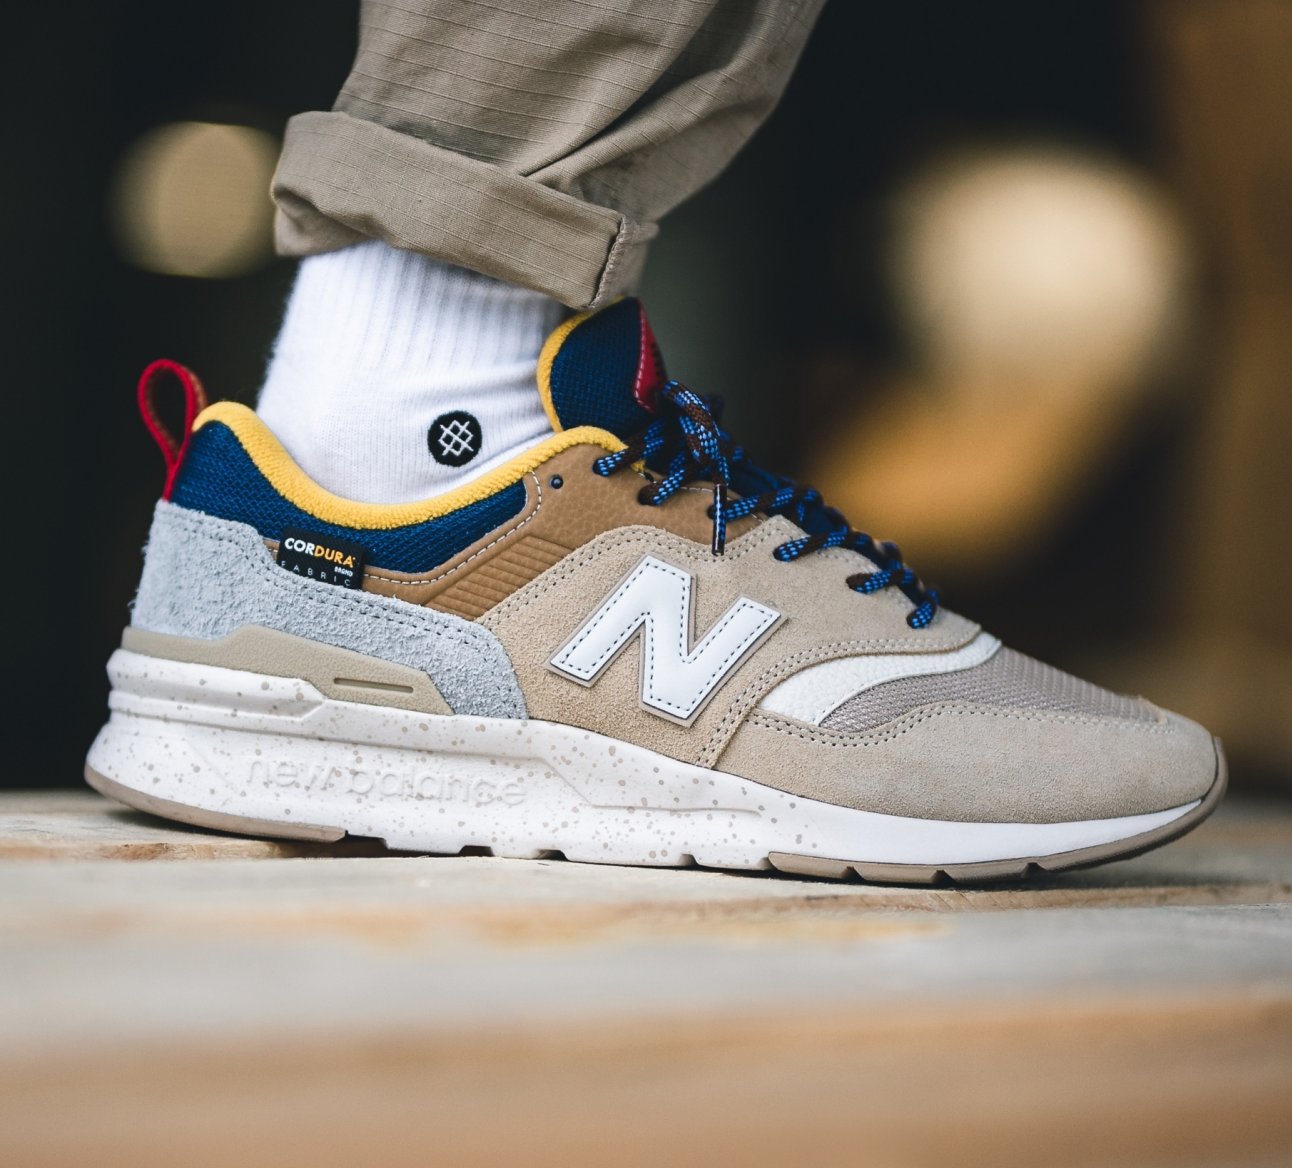 Sneaker Shouts™ on Twitter: "New Balance 997H Cordura “Beige” only $69.99 free shipping (25% OFF) BUY HERE: https://t.co/8sA934nLYw" / Twitter